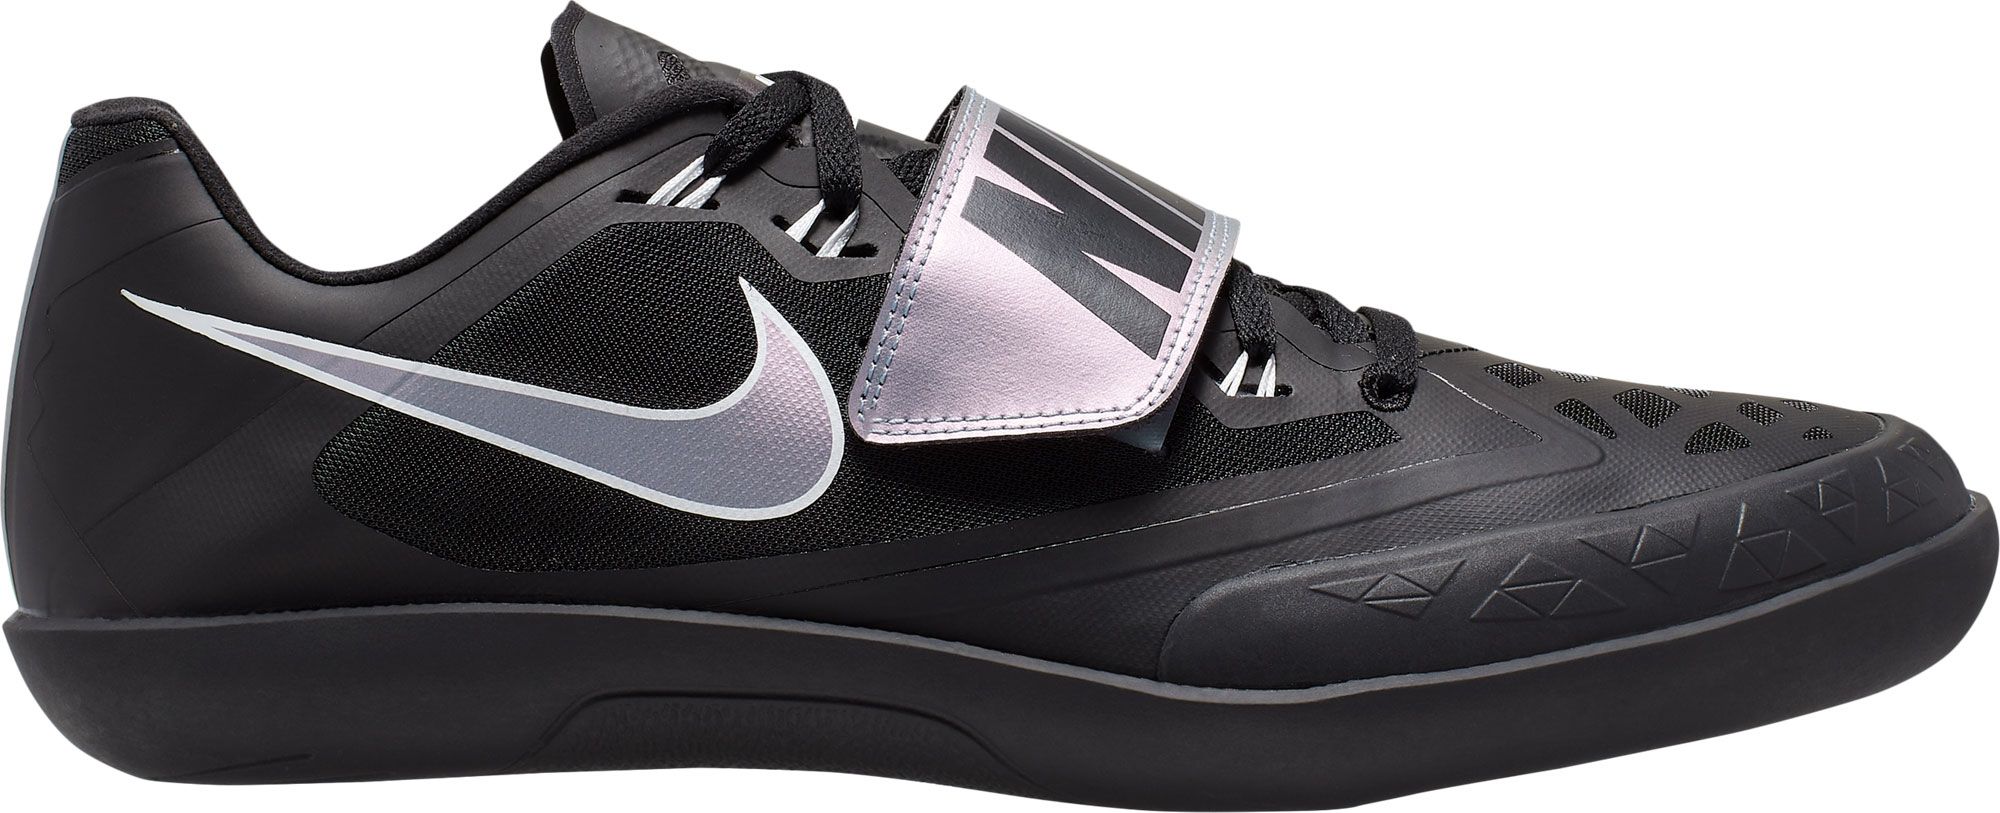 Nike Zoom SD 4 Track and Field Shoes | DICK'S Sporting Goods